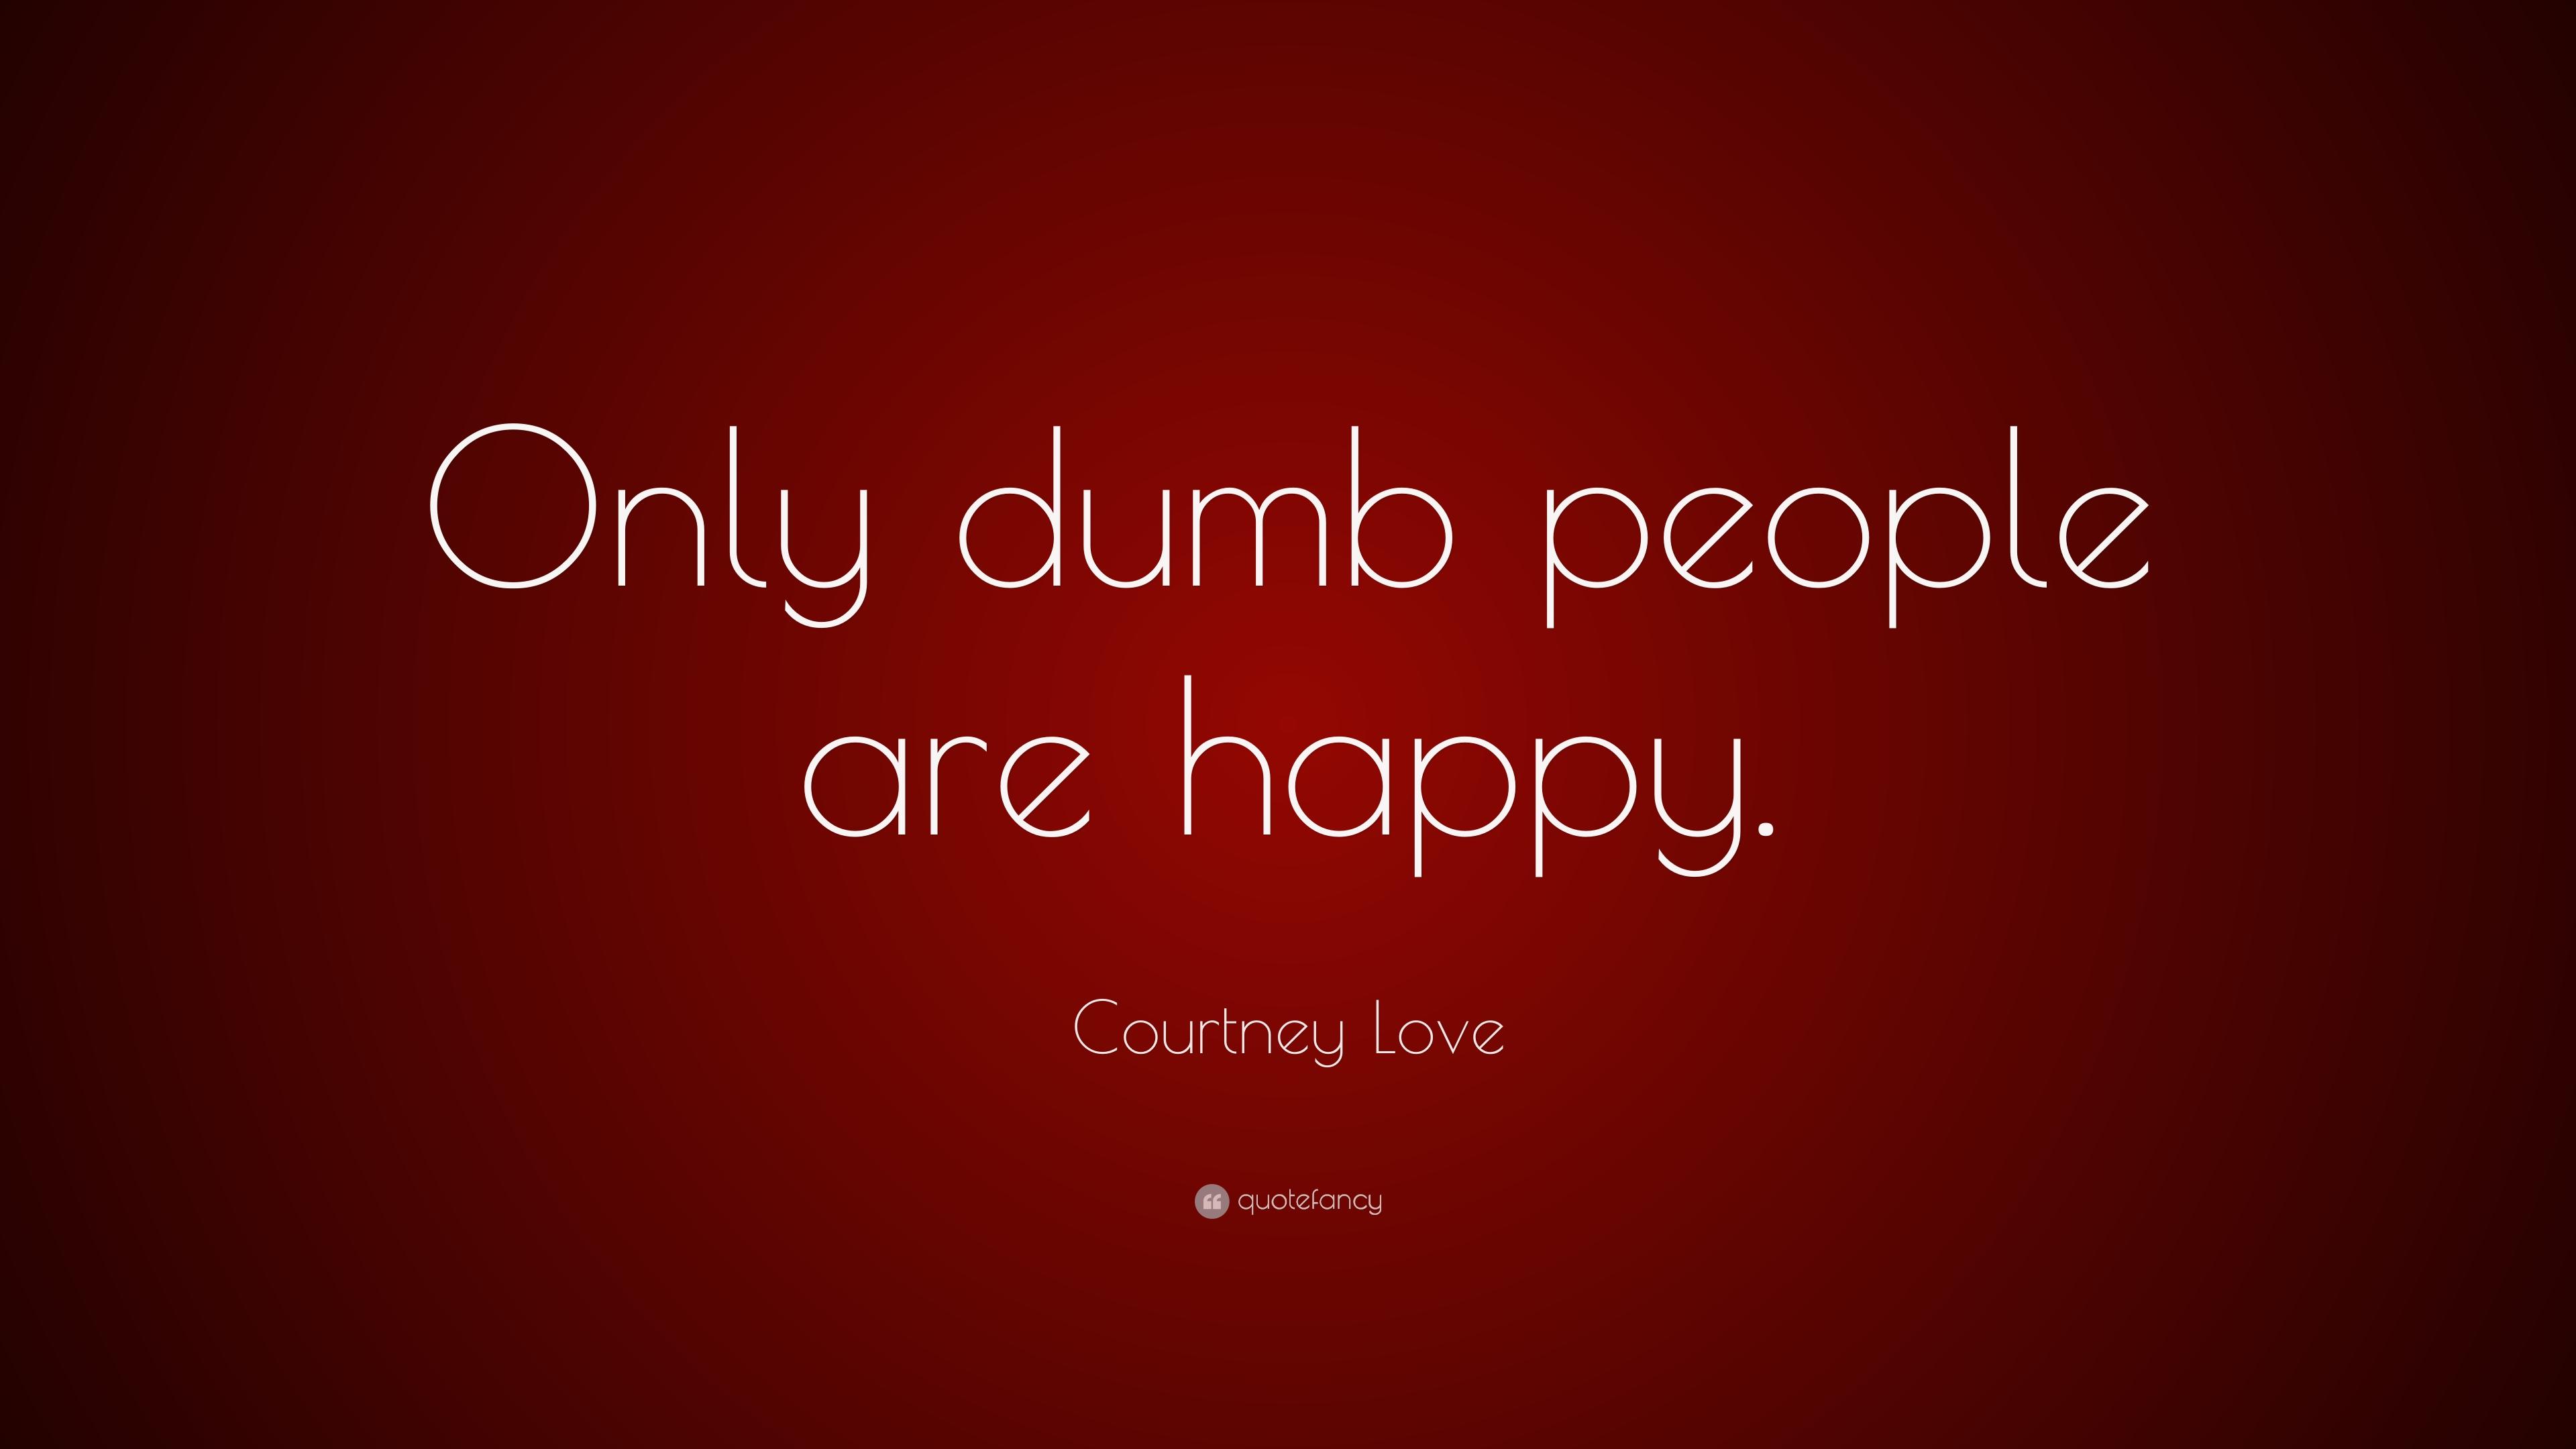 Courtney Love Quote: “Only dumb people are happy.”